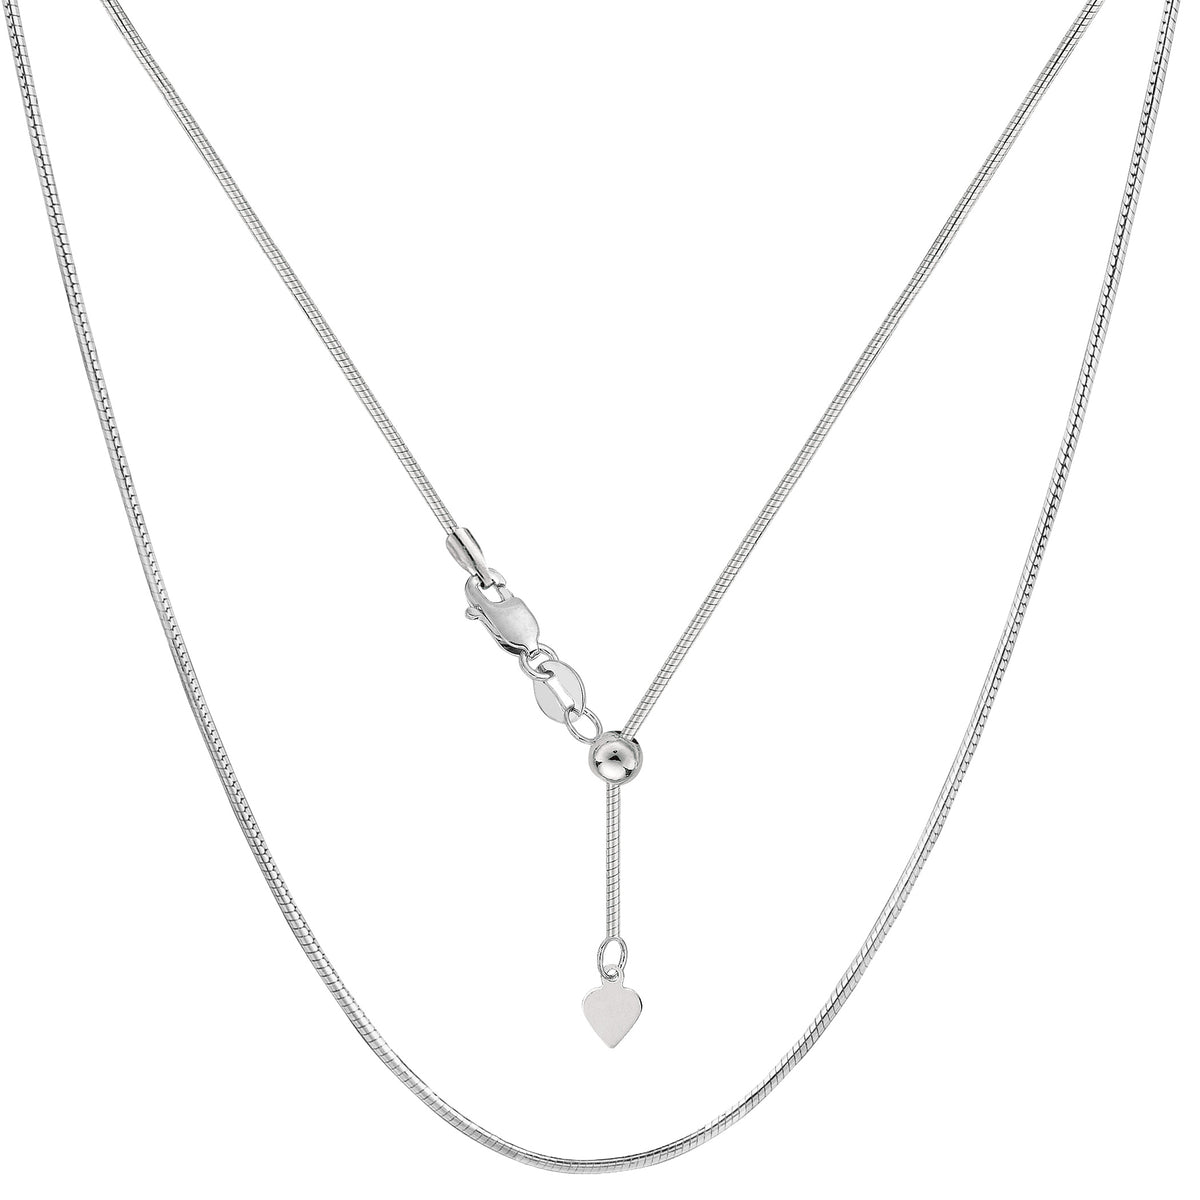 Sterling Silver Rhodium Plated Sliding Adjustable Snake Chain Necklace, Width 1.2mm, 22" fine designer jewelry for men and women